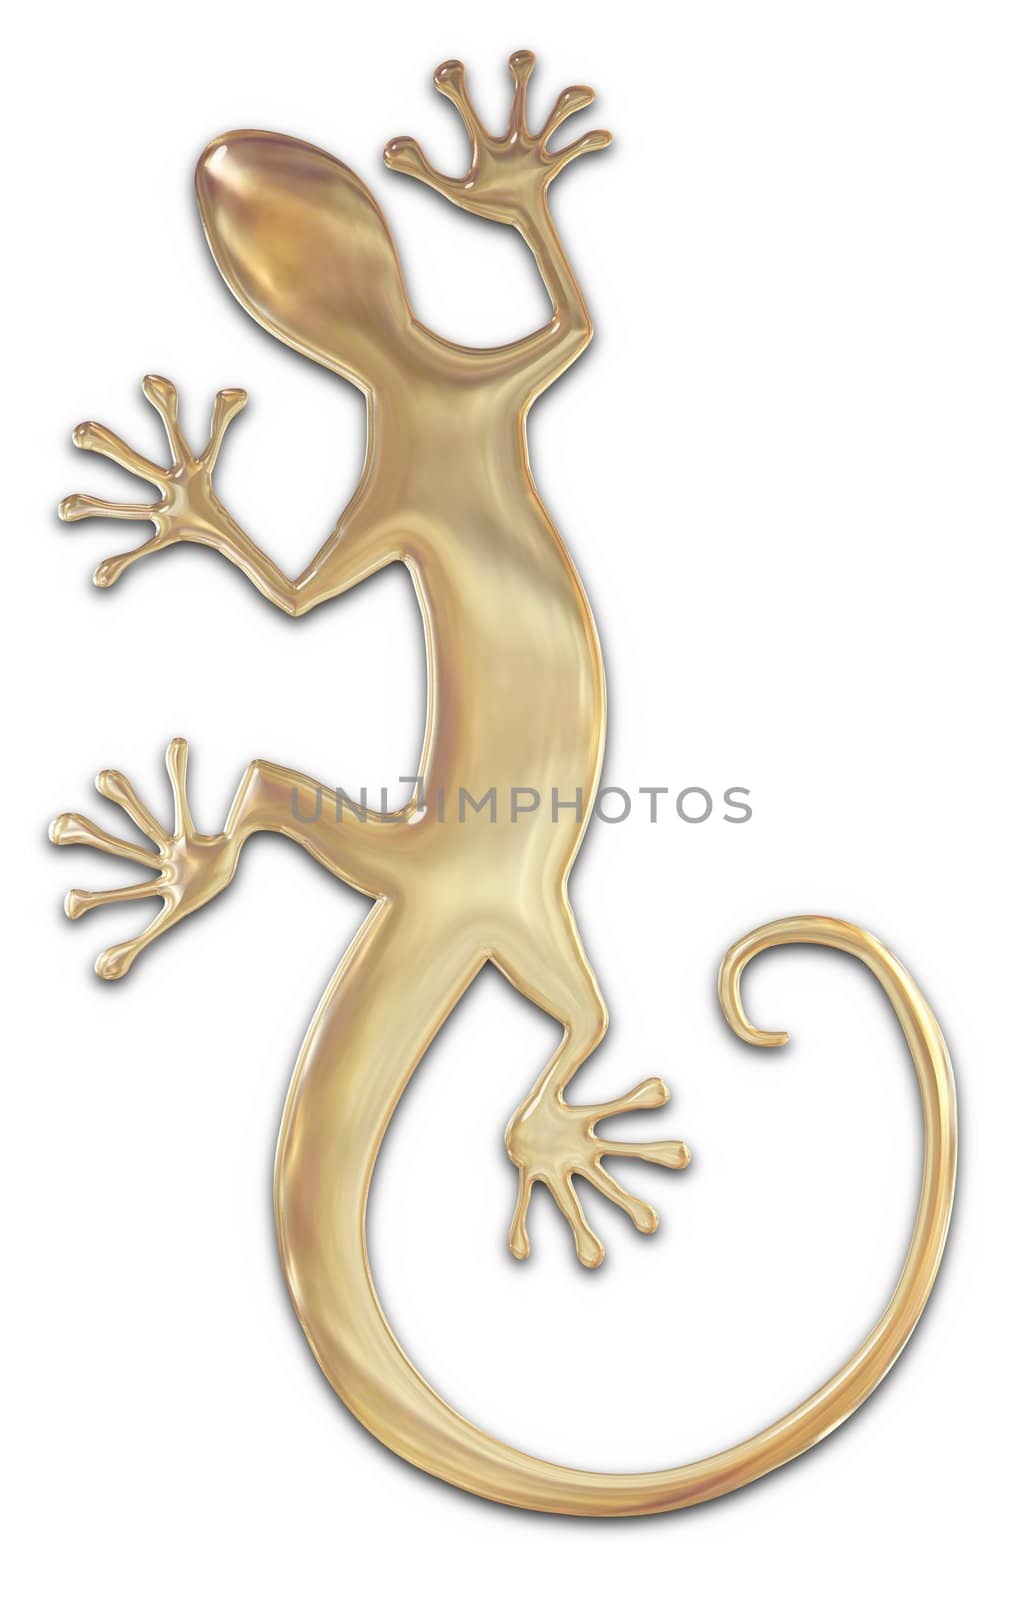 Illustration of an isolated gold Gecko